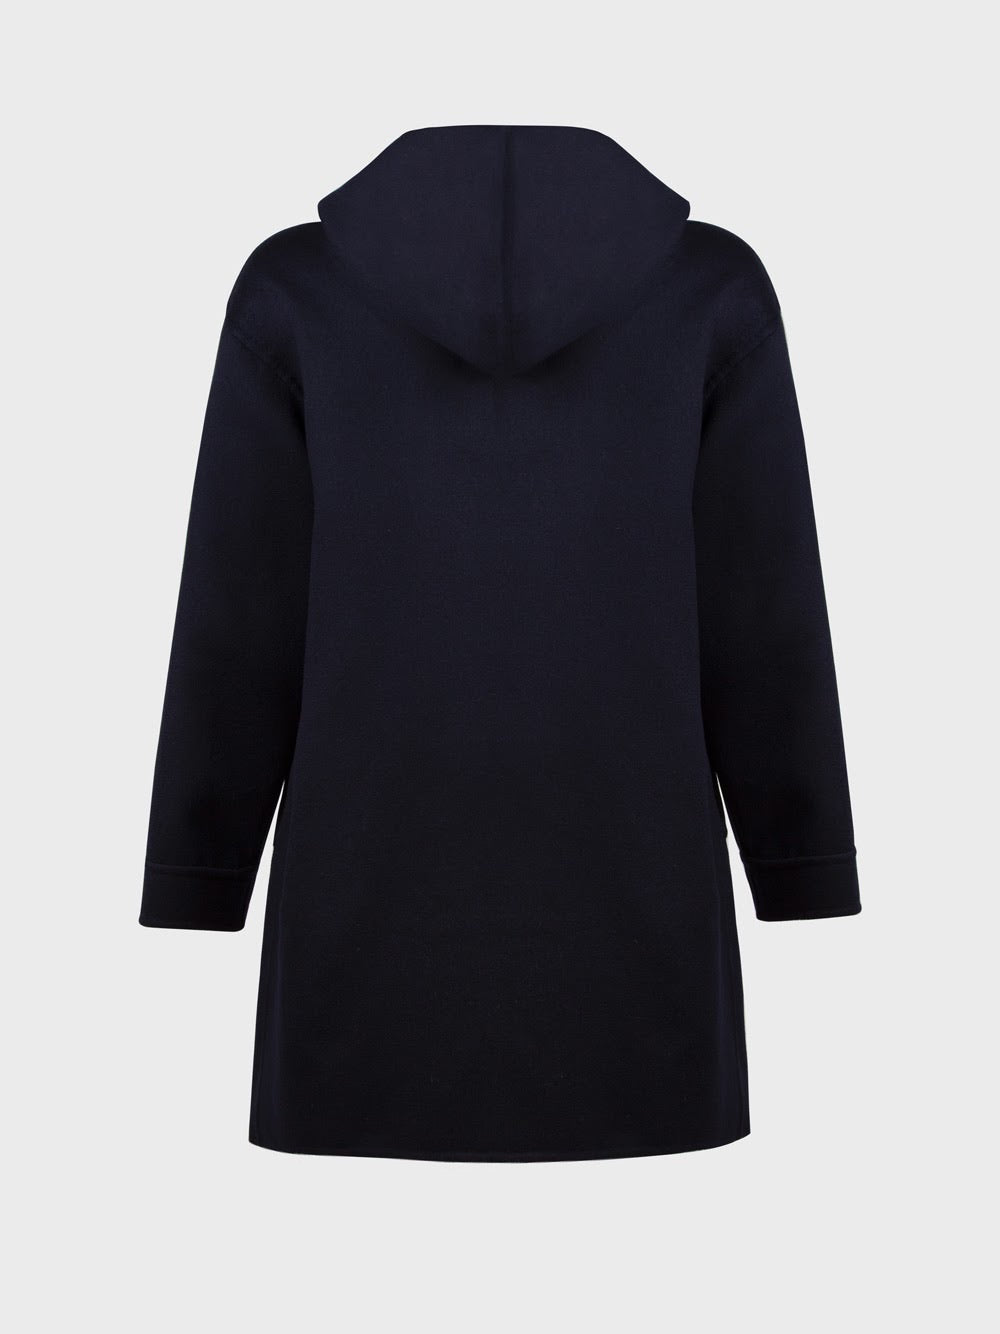 Outerwear in Cashmere "Naos"